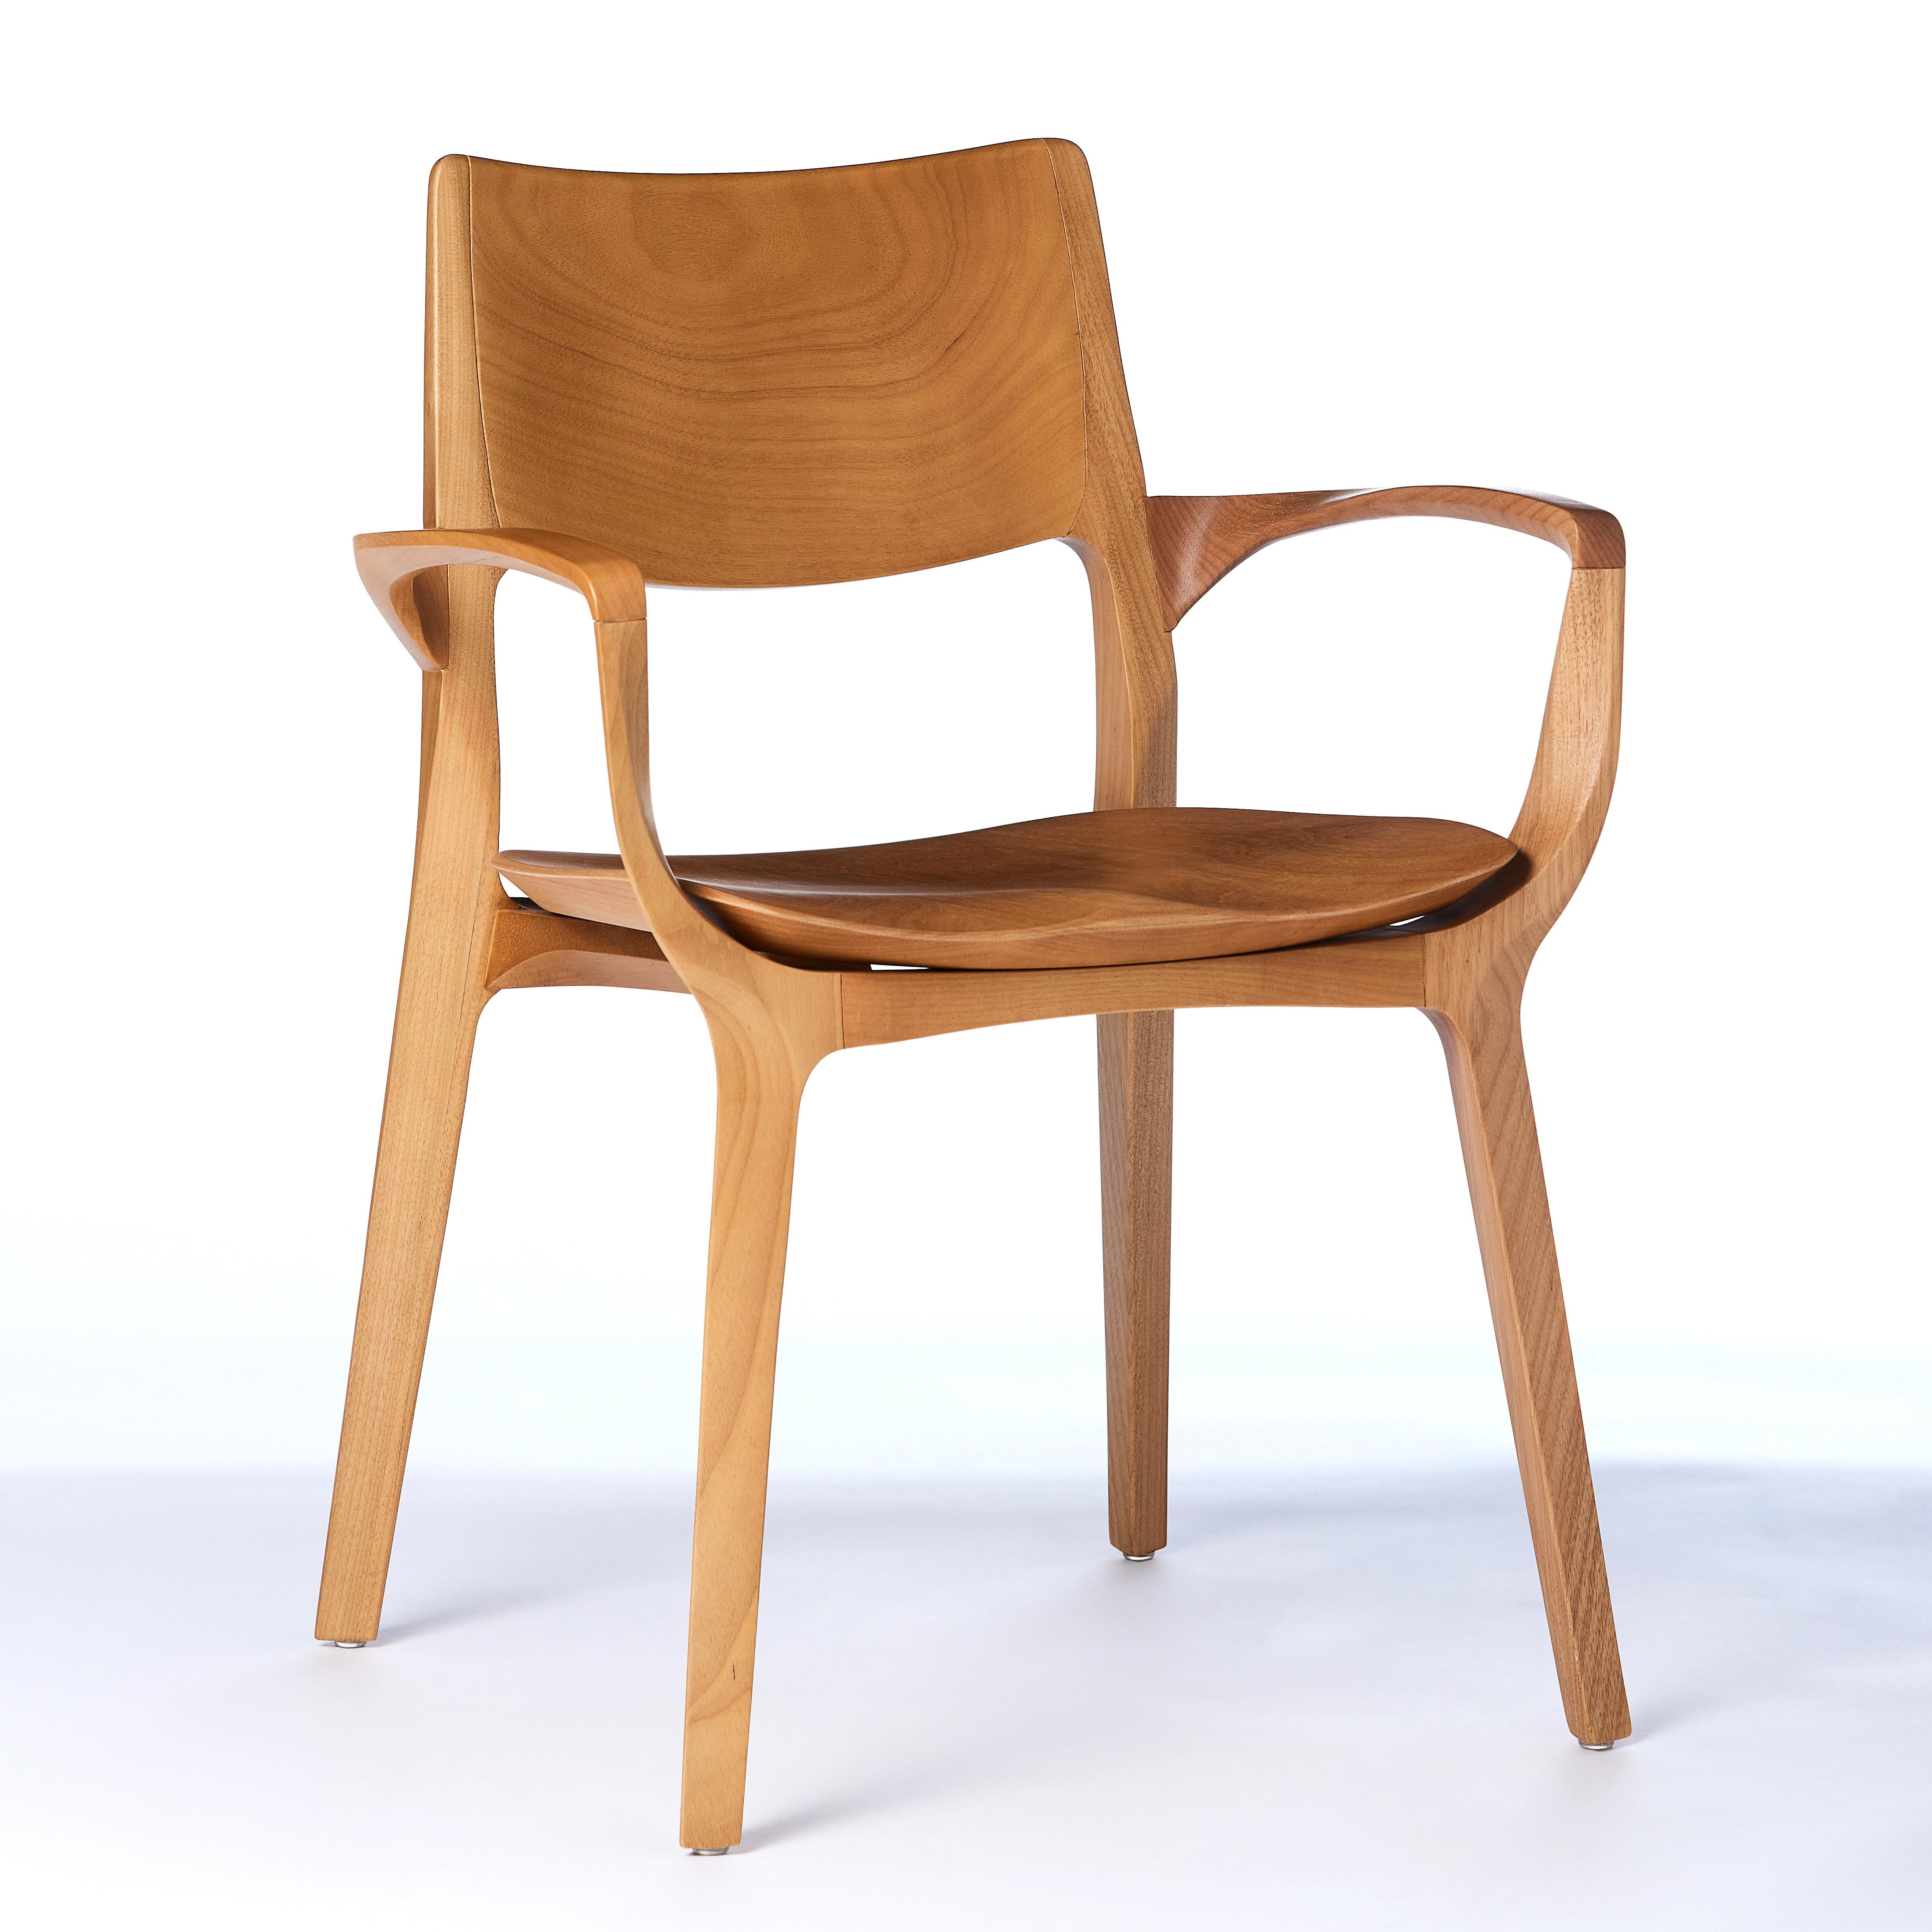 The Moderns Aurora Chair Sculptured in Walnut Finish Arms, leather seating, cane en vente 6